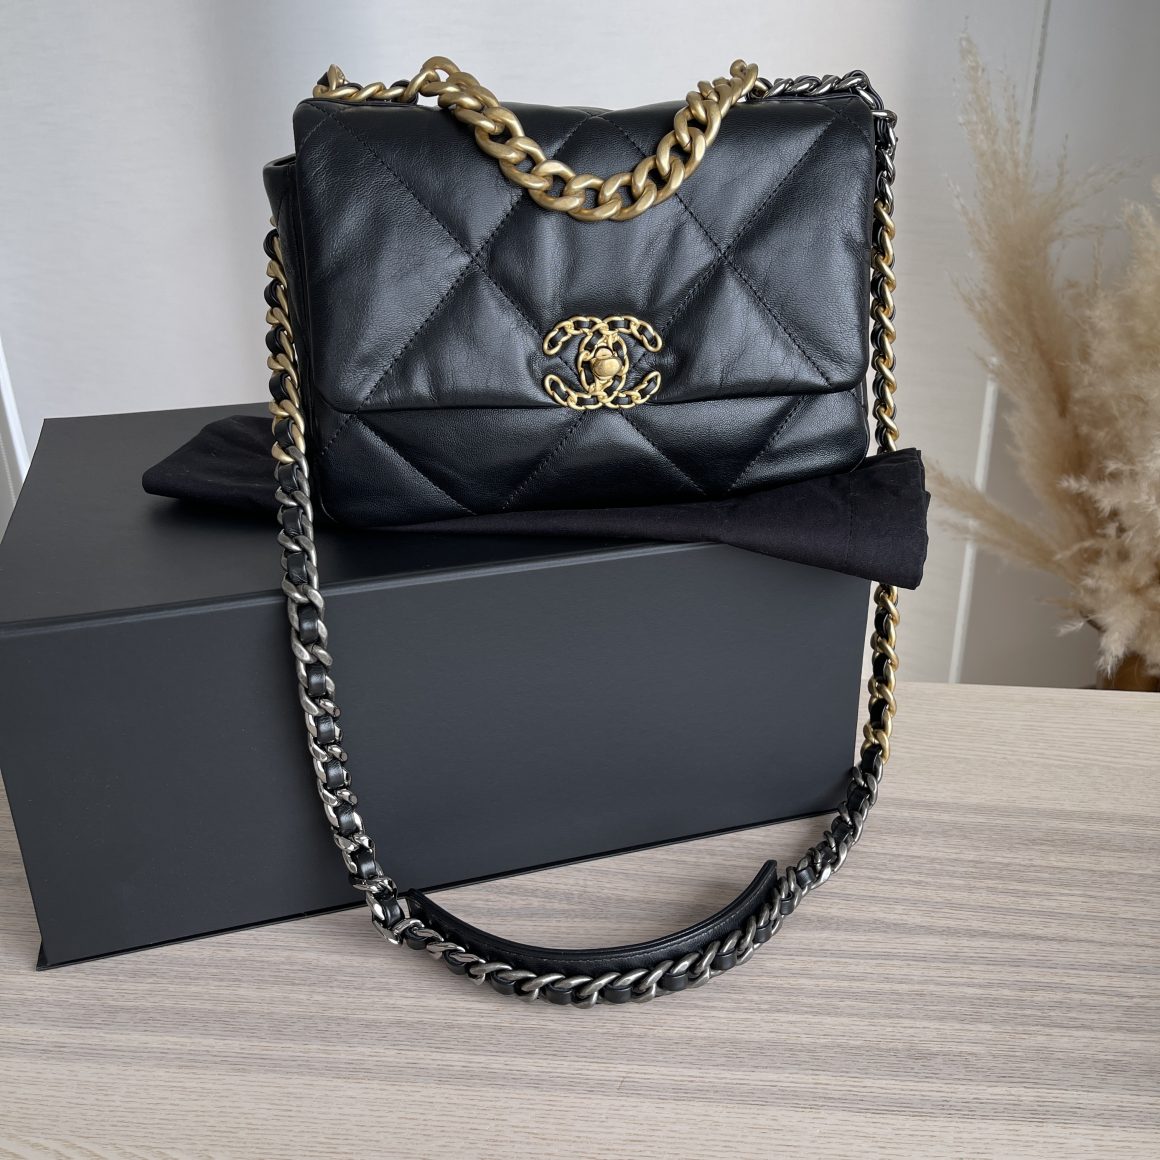 CHANEL Lambskin Quilted Medium Chanel 19 Flap So Black 1187269